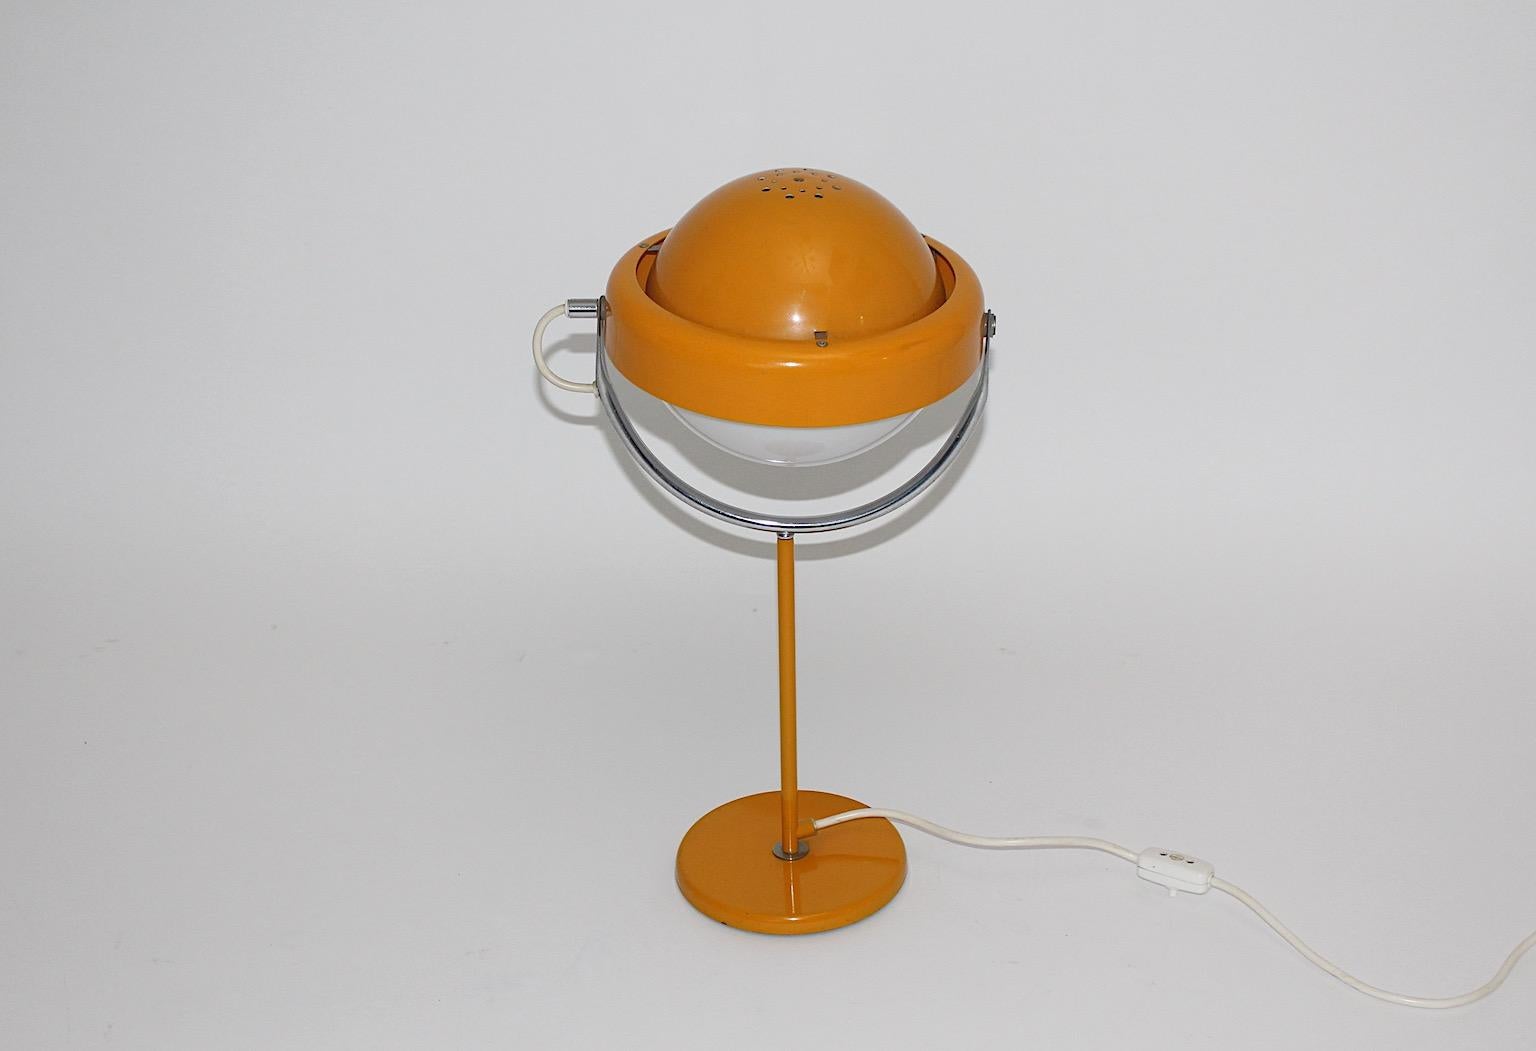 Space Age vintage orange or yellow table lamp from metal by Uno Dahlen
for Aneta 1960s Sweden.
A joyful and powerful table lamp in beautiful dark yellow or soft orange color with an adjustable lamp shade.
Labeled underneath with company's name